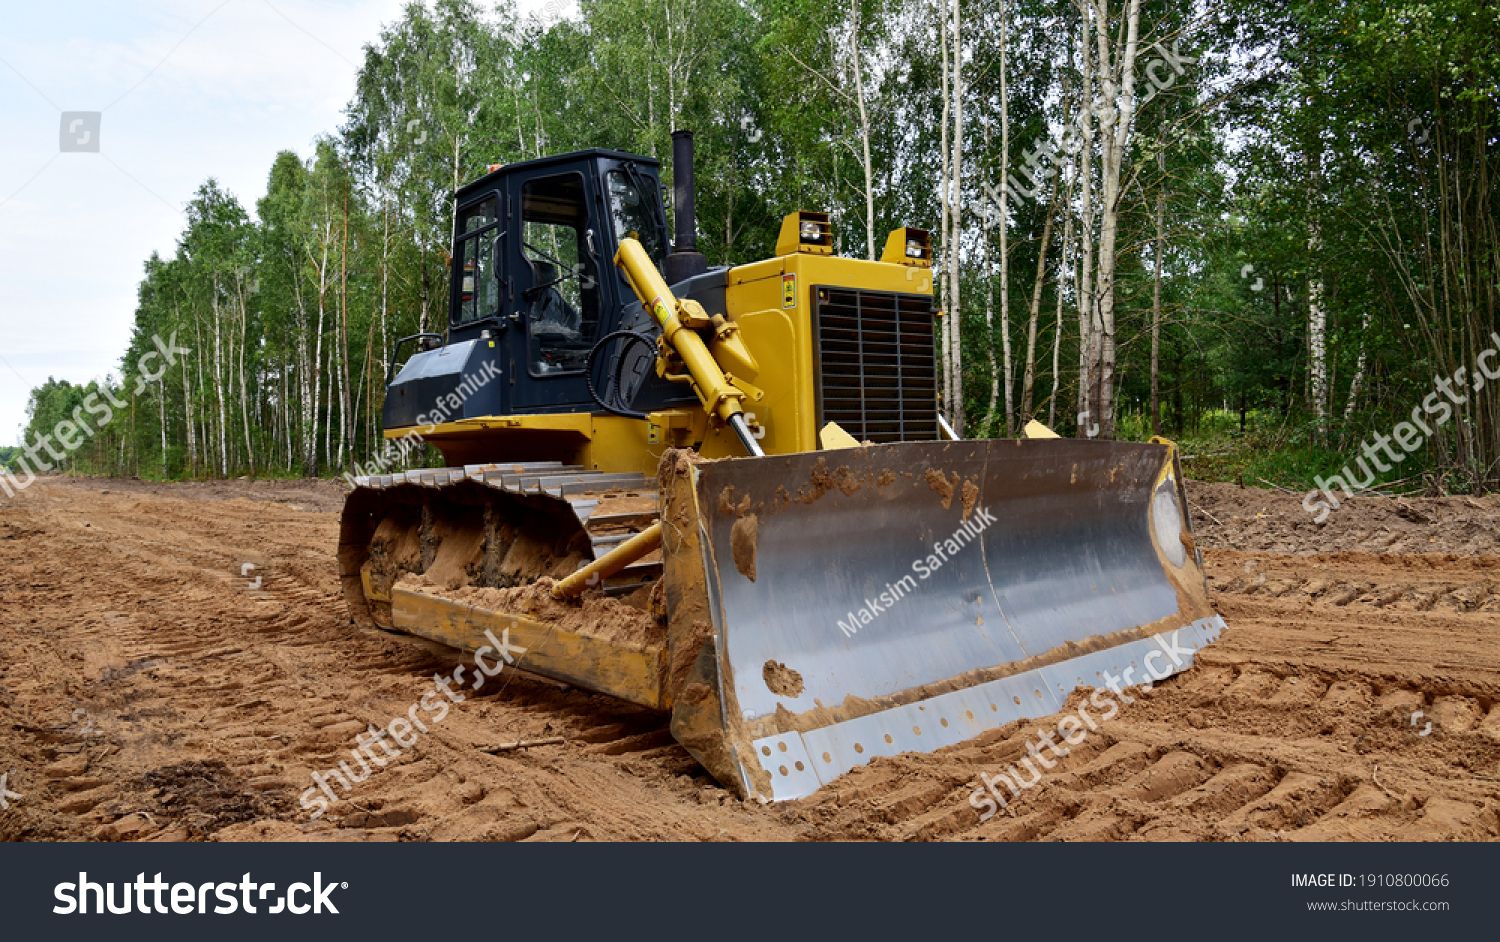 Dozer during clearing forest for construction new road . Yellow Bulldozer at forestry work Earth-moving equipment at road work, land clearing, grading, pool excavation, utility trenching #1910800066